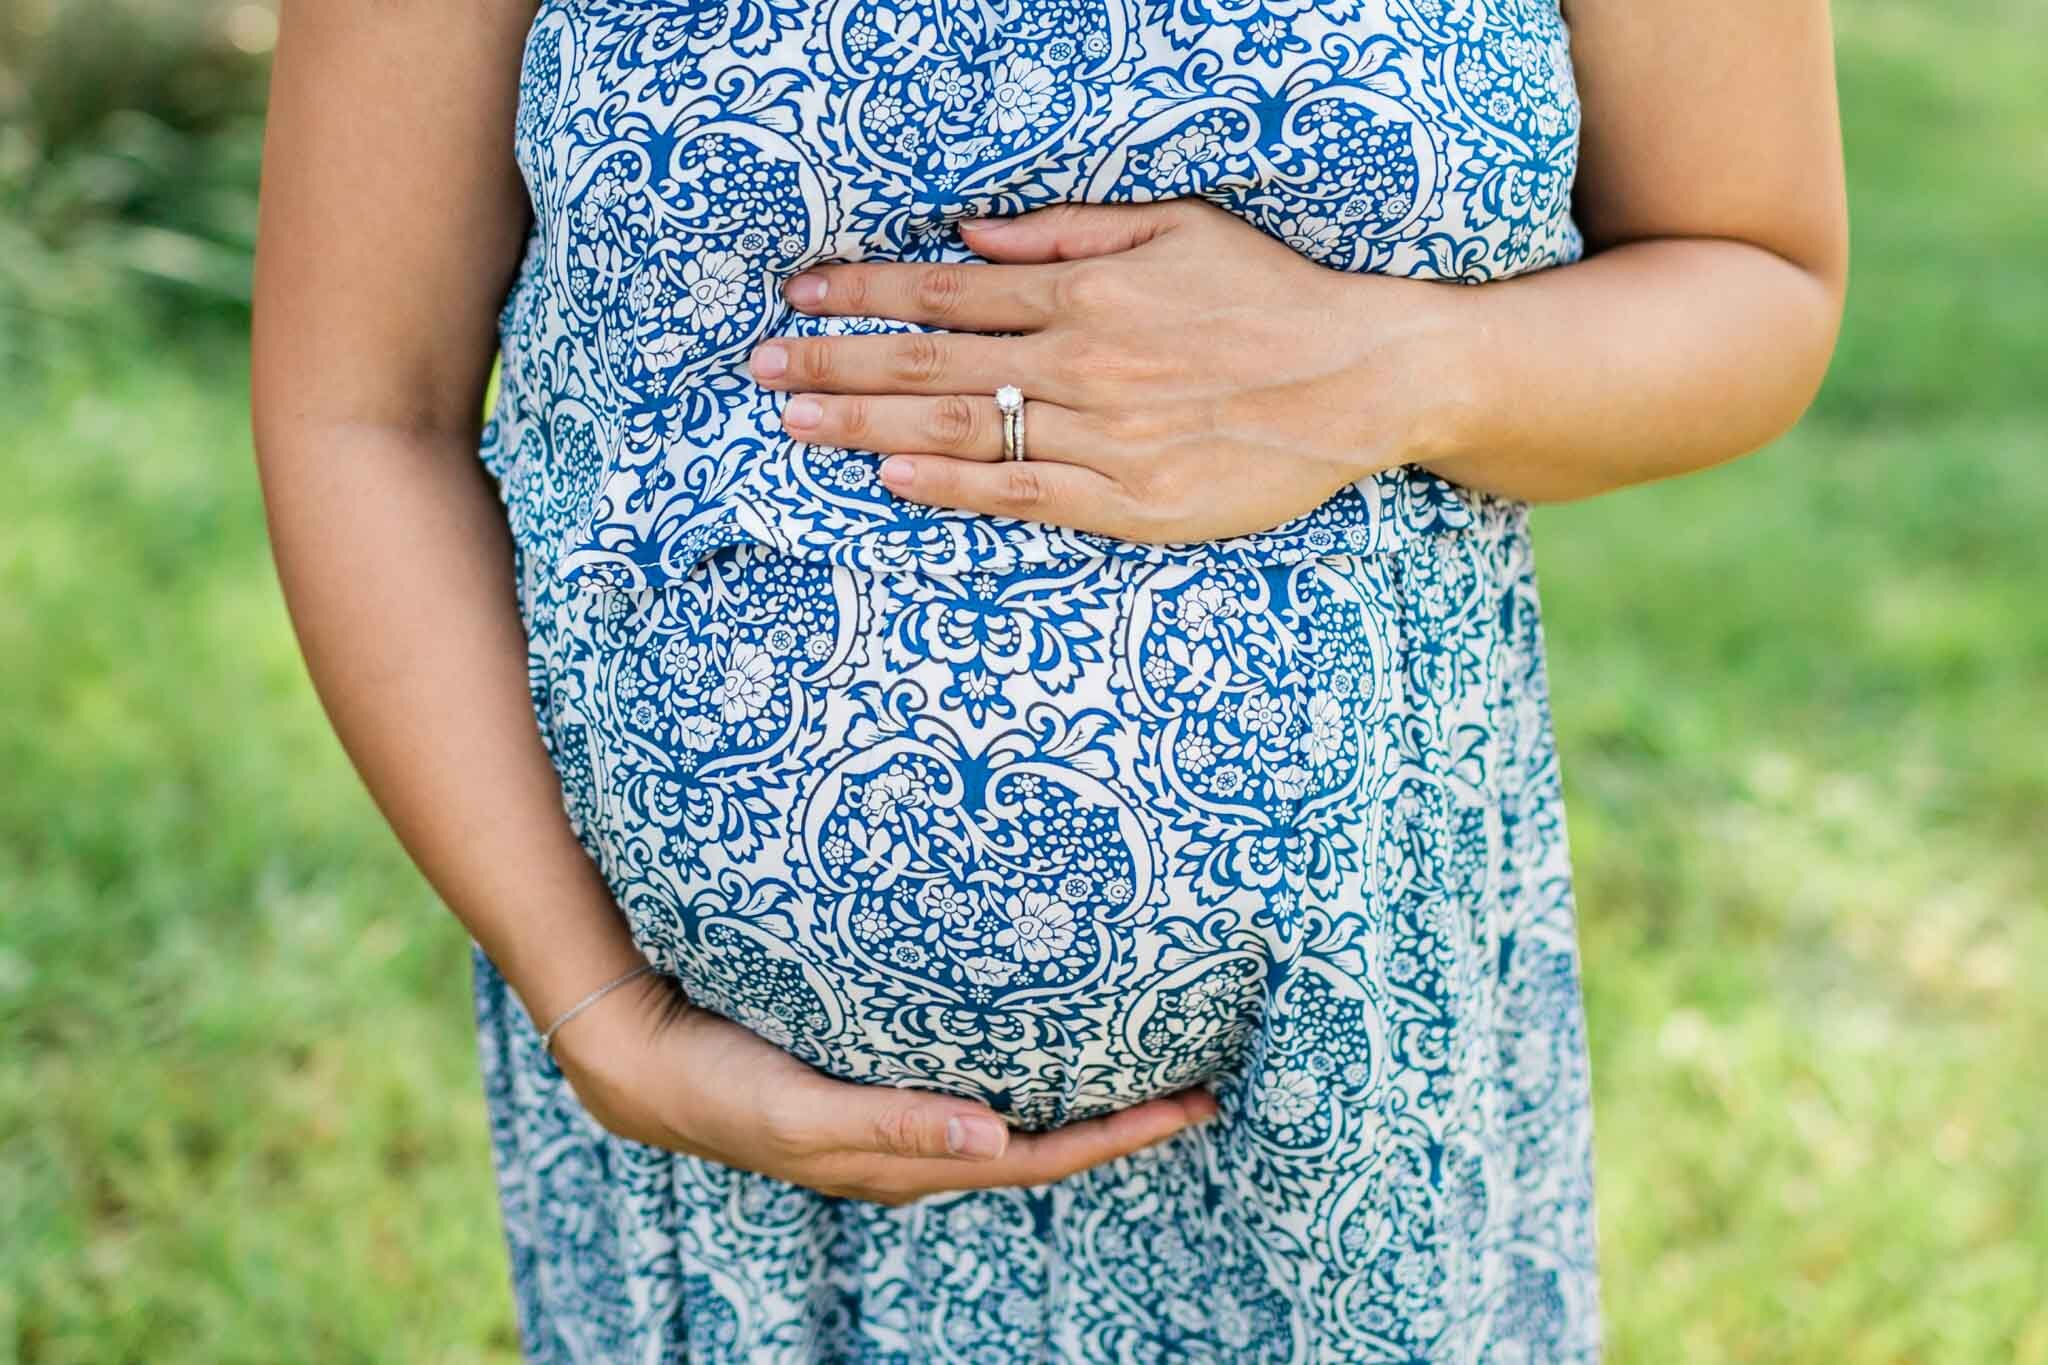 Raleigh Maternity Photographer | By G. Lin Photography | NCMA Maternity Photos | Close up of woman's baby bump